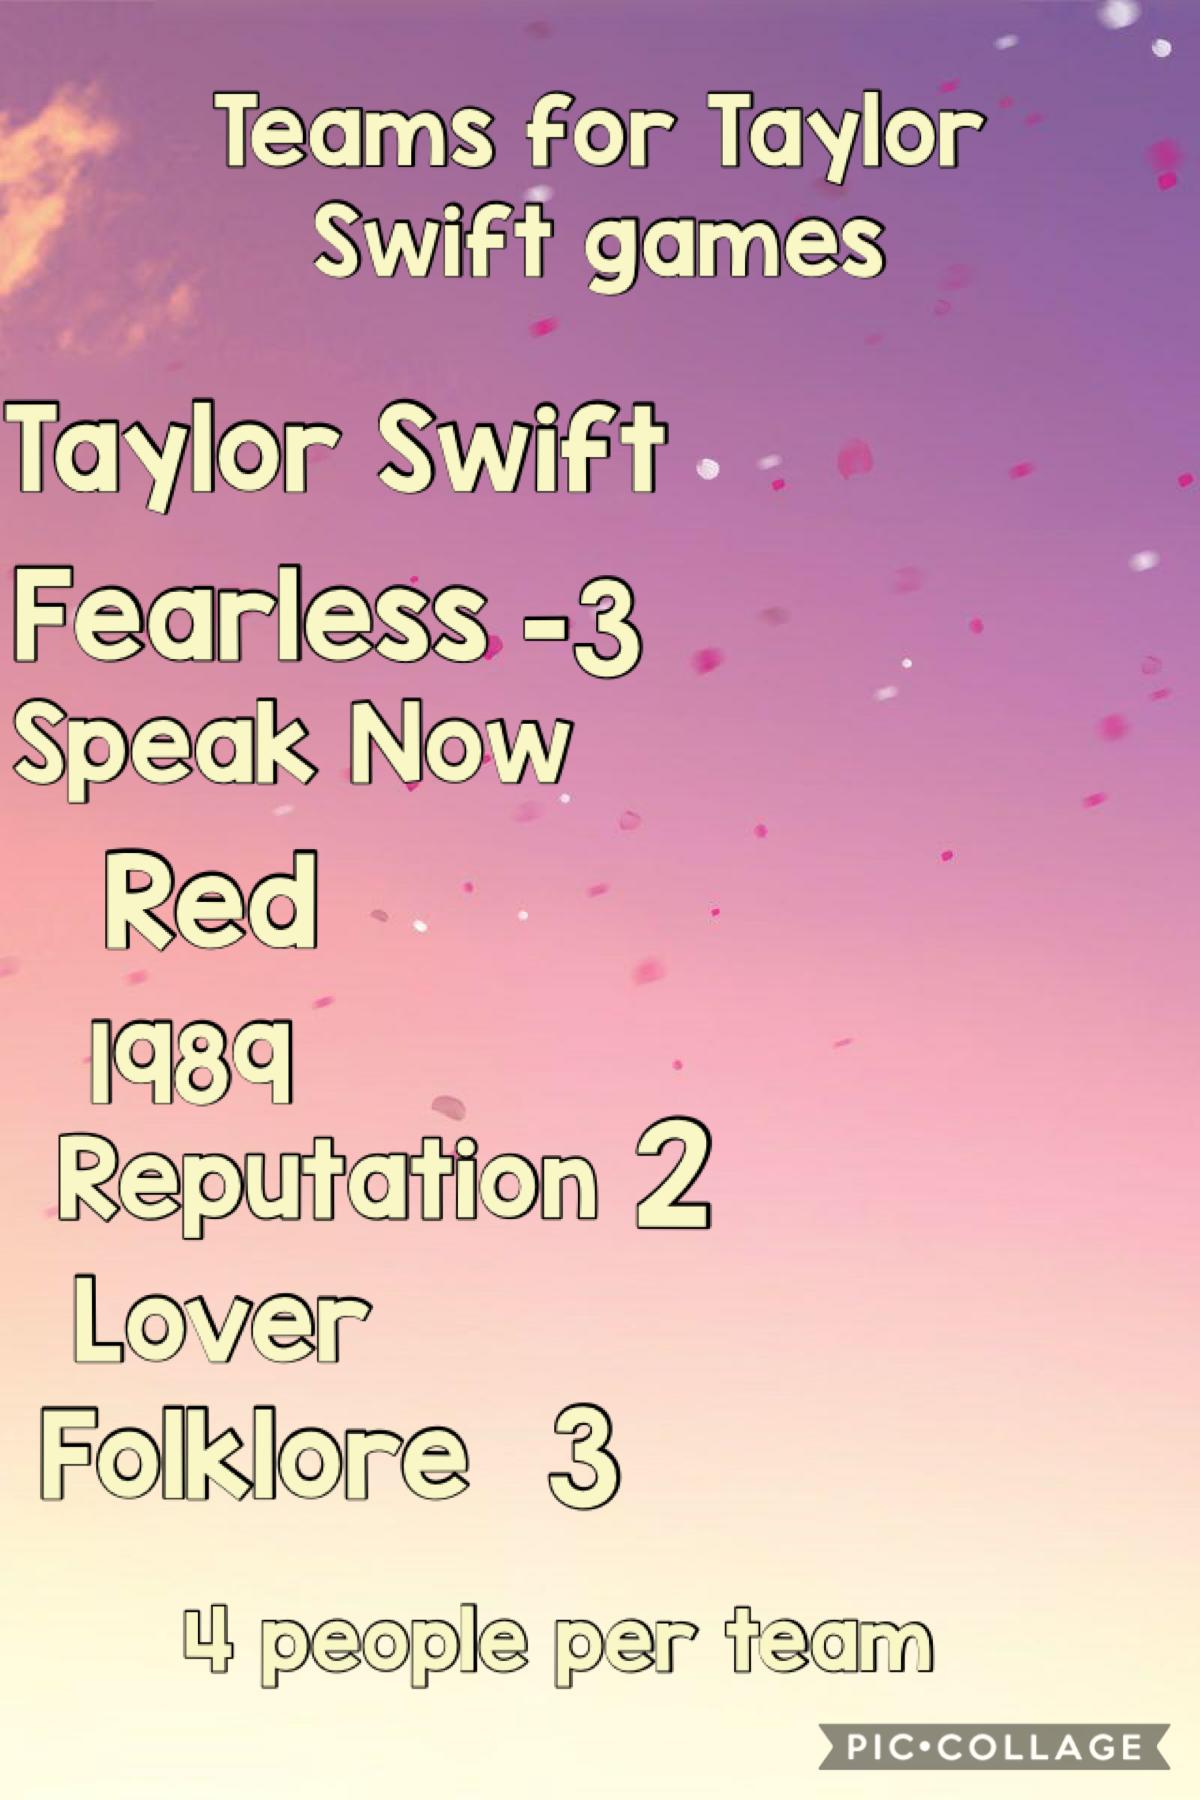 Teams for the Taylor Swift games update